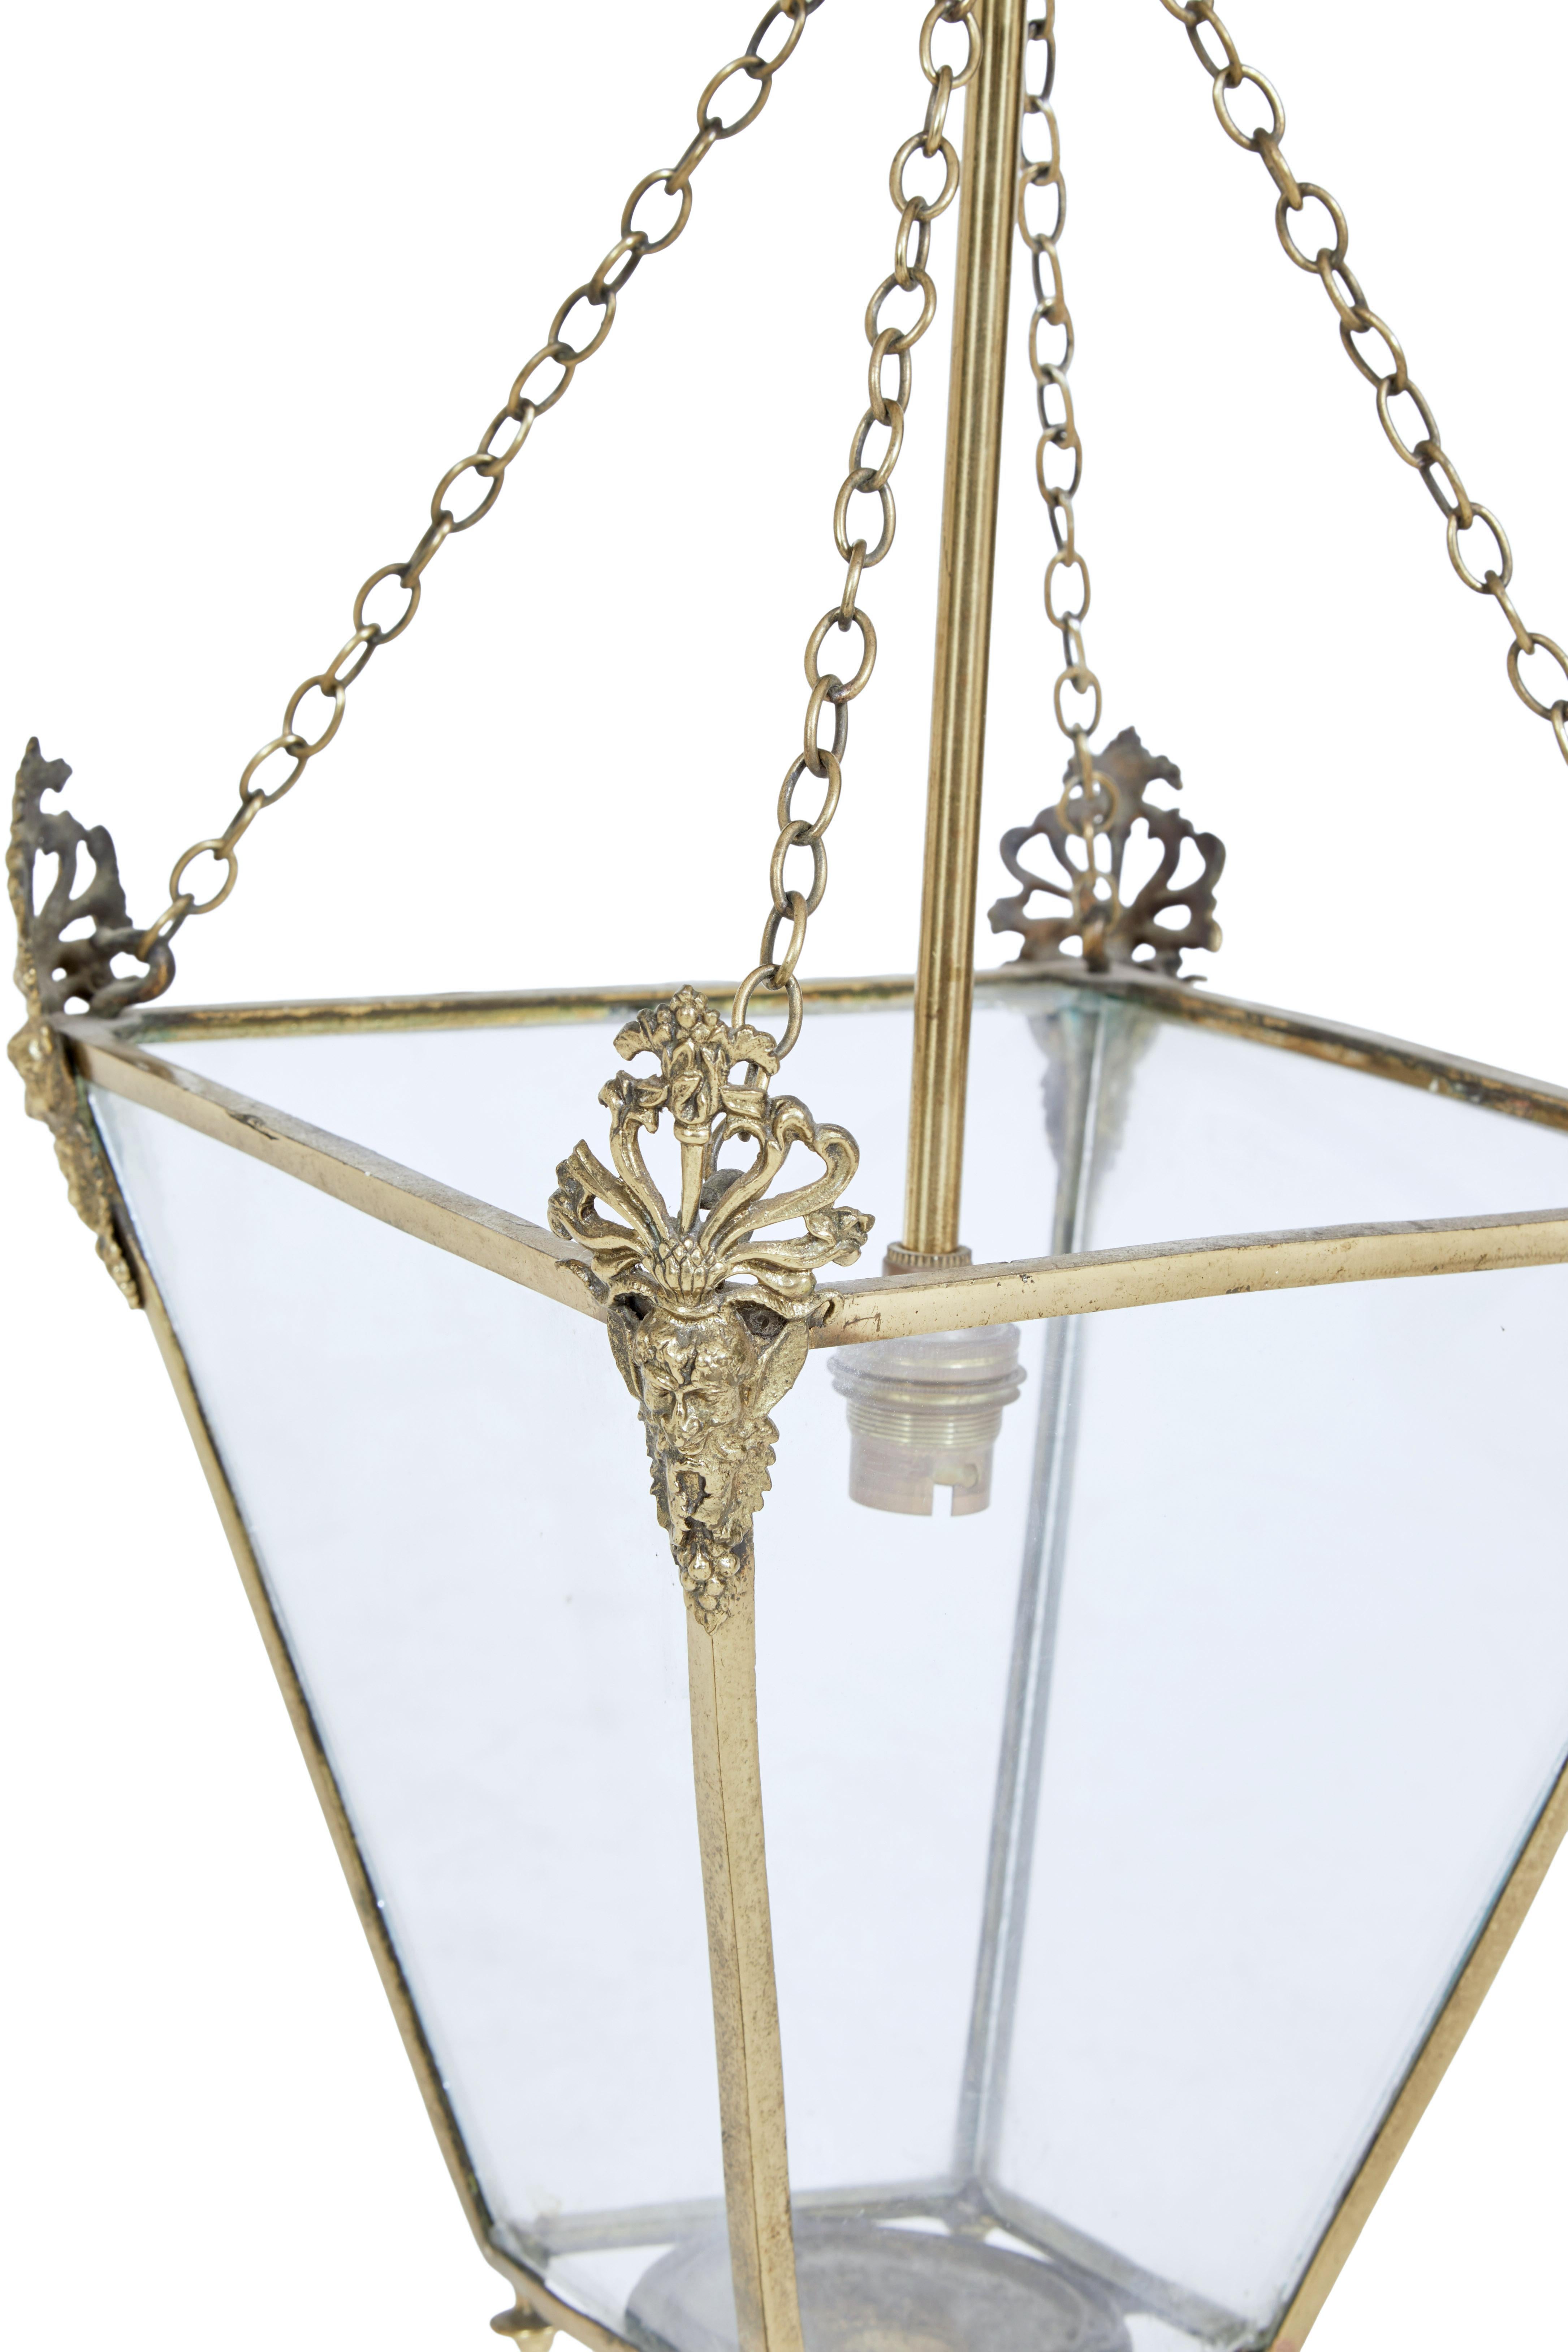 Late 19th century gilded and glazed hanging lantern circa 1890.

Fine quality gilded 4 sided lantern with elaborate cast grotesques on each corner. Further decorated with finials on the bottom.

Supported by 4 chains that lead to a central rose.